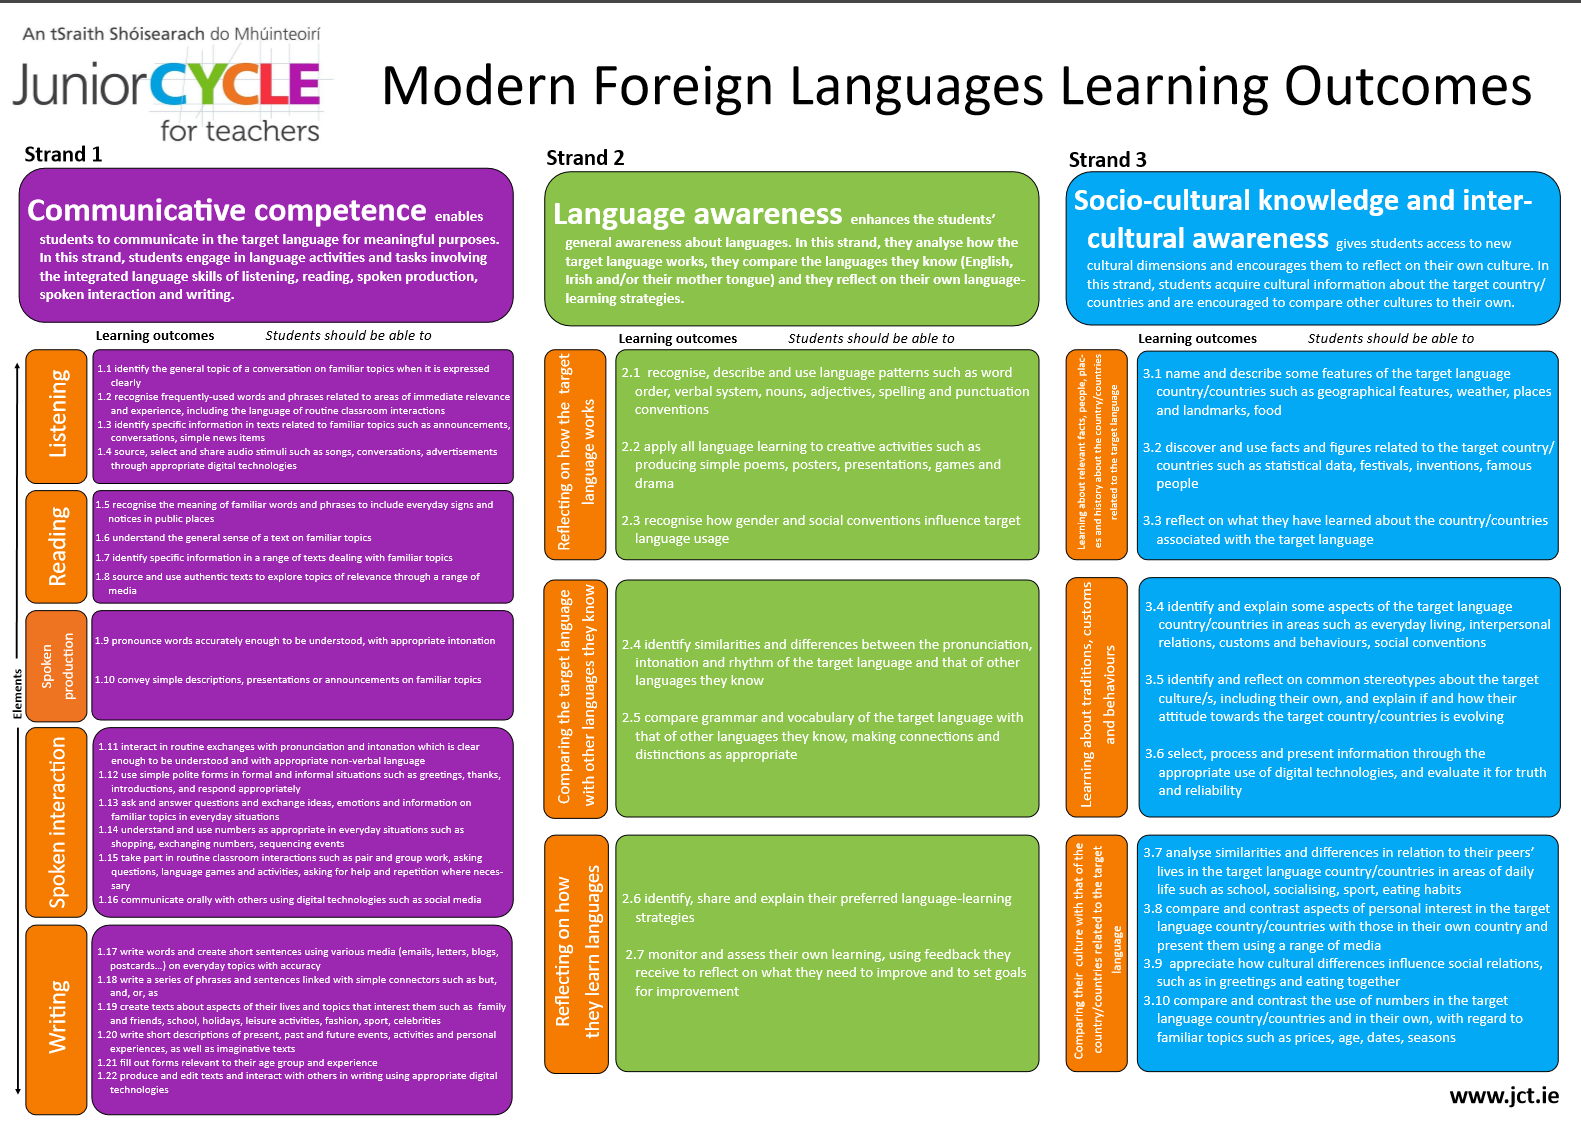 Learning Outcomes MFL